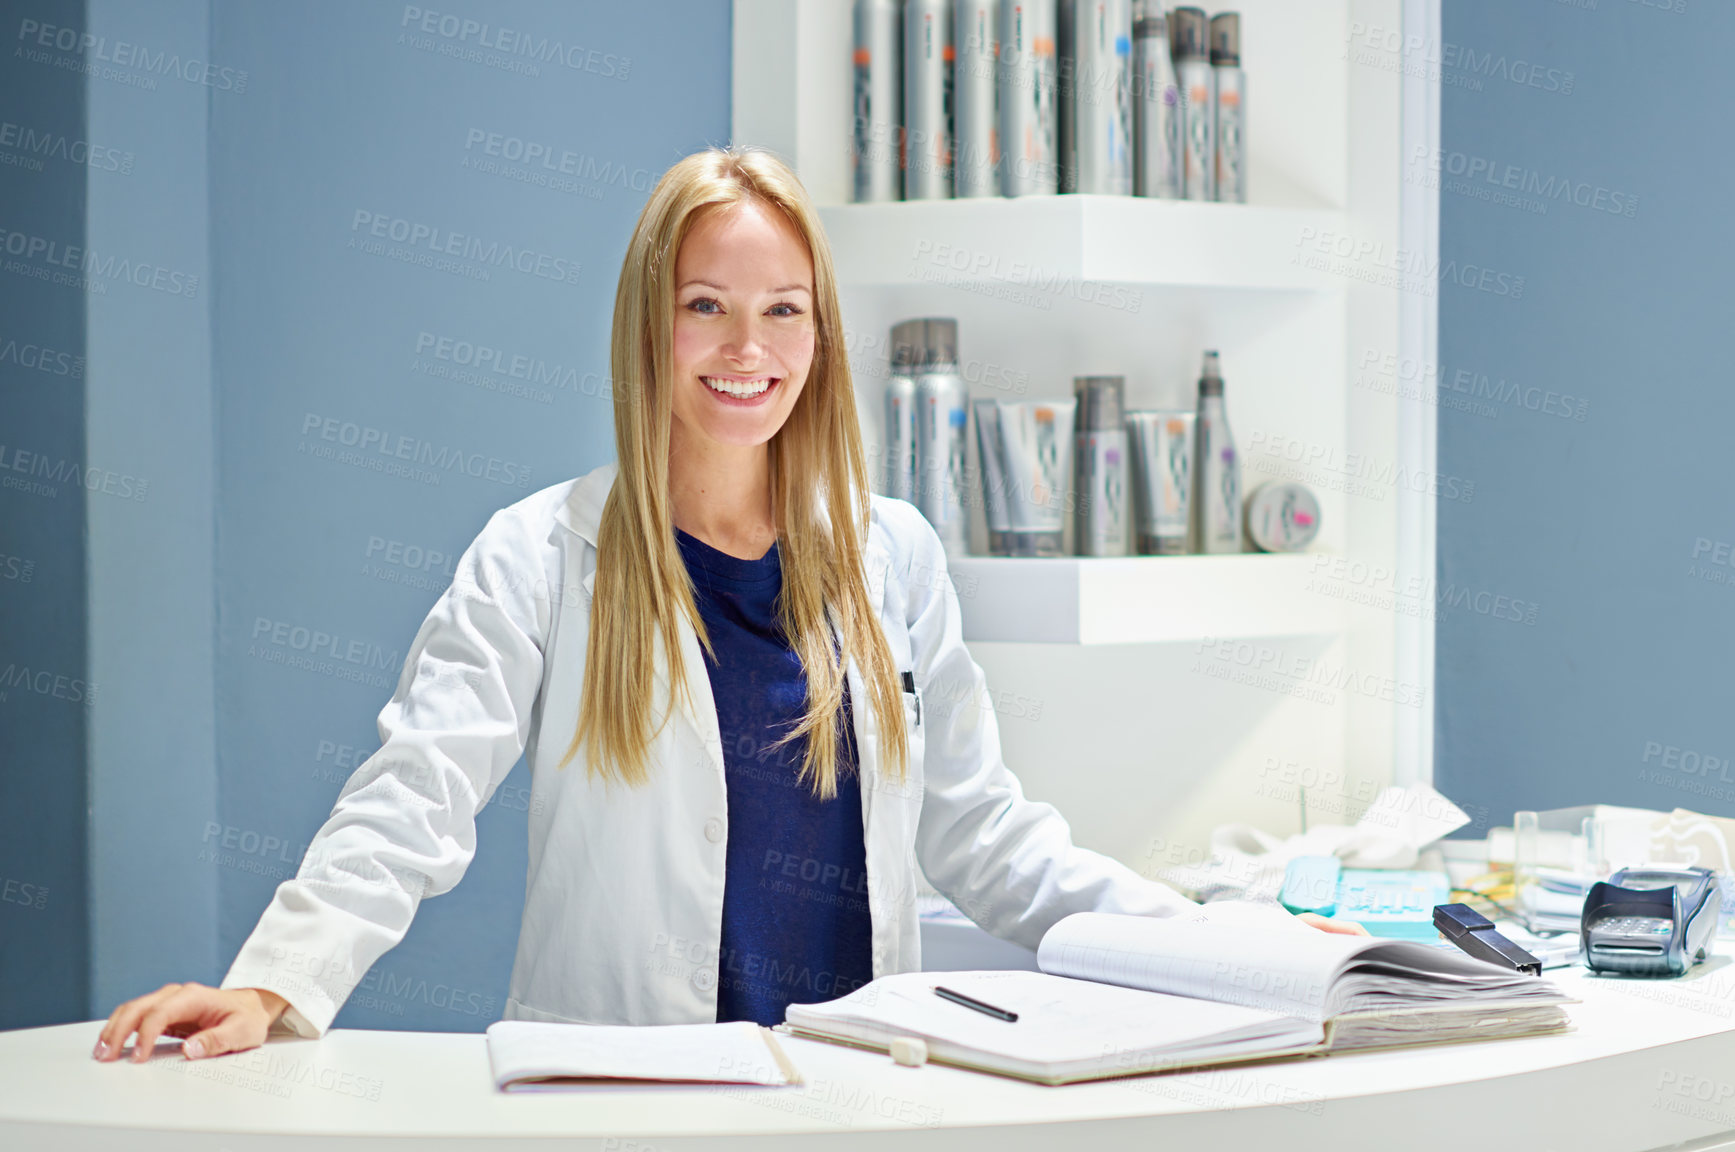 Buy stock photo Portrait of an attractive young woman at the counter of a cosmetics store